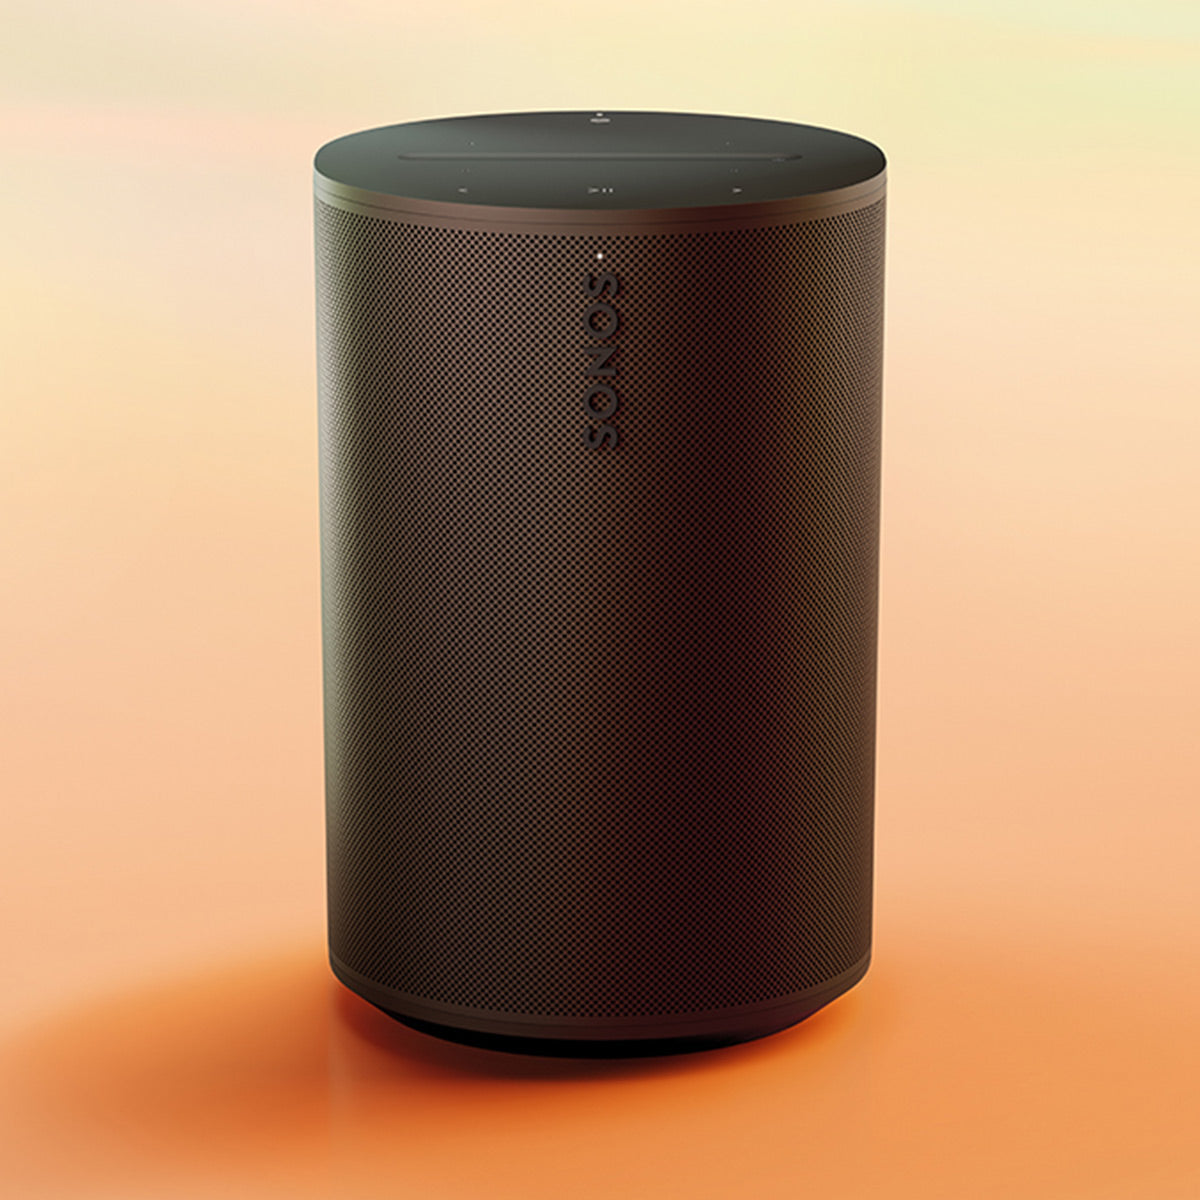 Sonos Era 100 Voice-Controlled Wireless Smart Speaker with Bluetooth, Trueplay Acoustic Tuning Technology, & Amazon Alexa Built-In (Black)